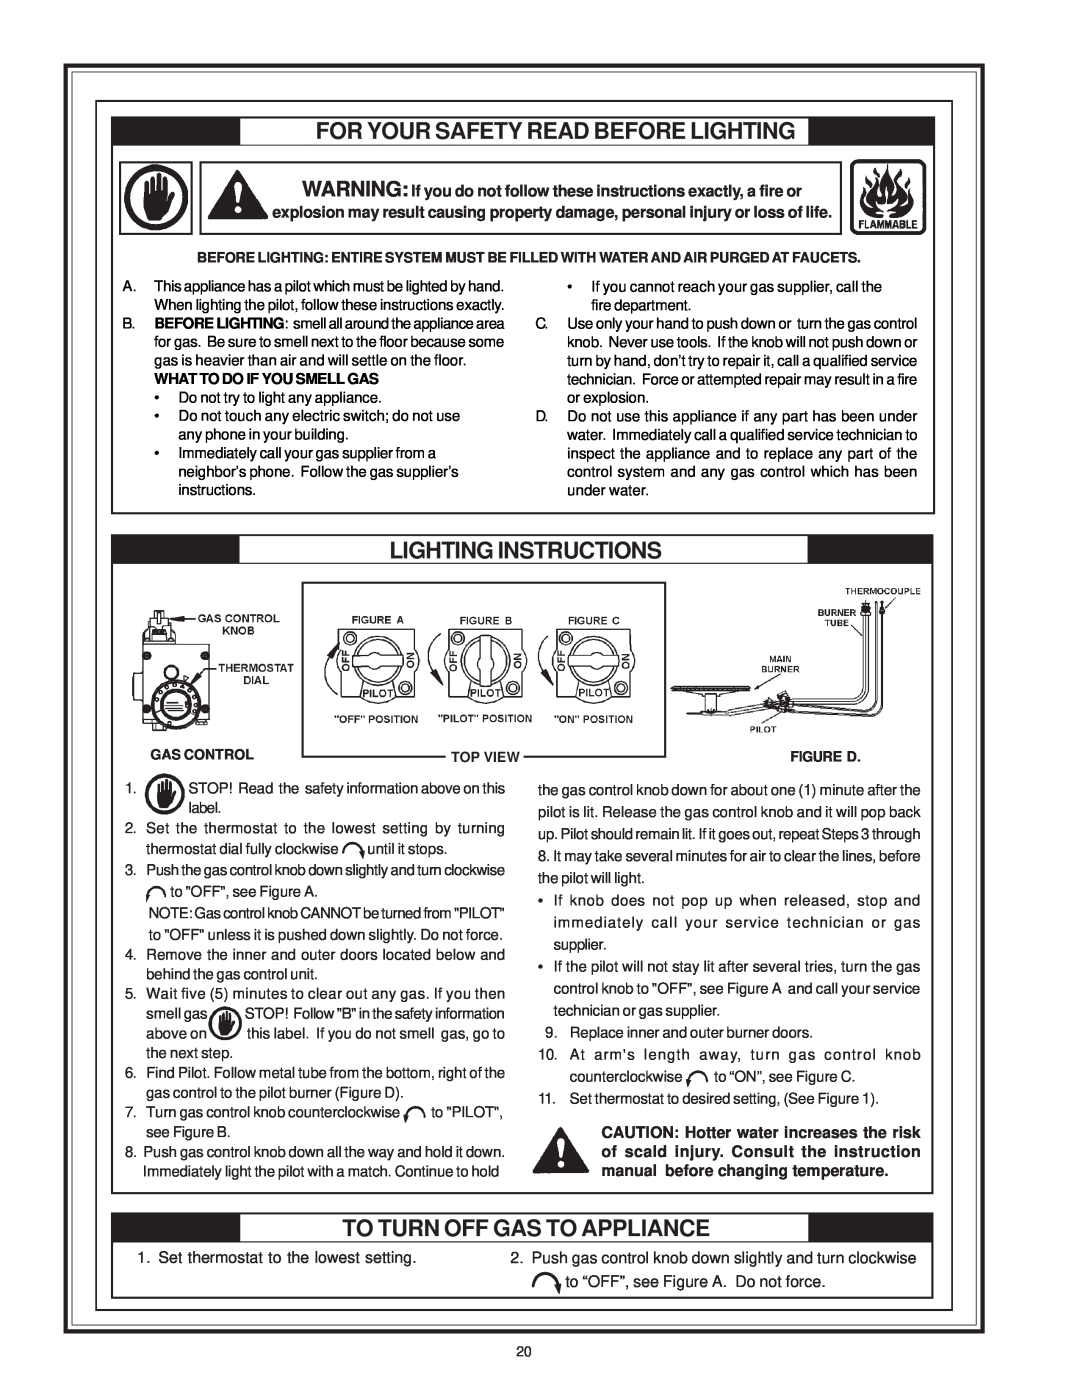 Reliance Water Heaters 196296-001 For Your Safety Read Before Lighting, Lighting Instructions, What To Do If You Smell Gas 